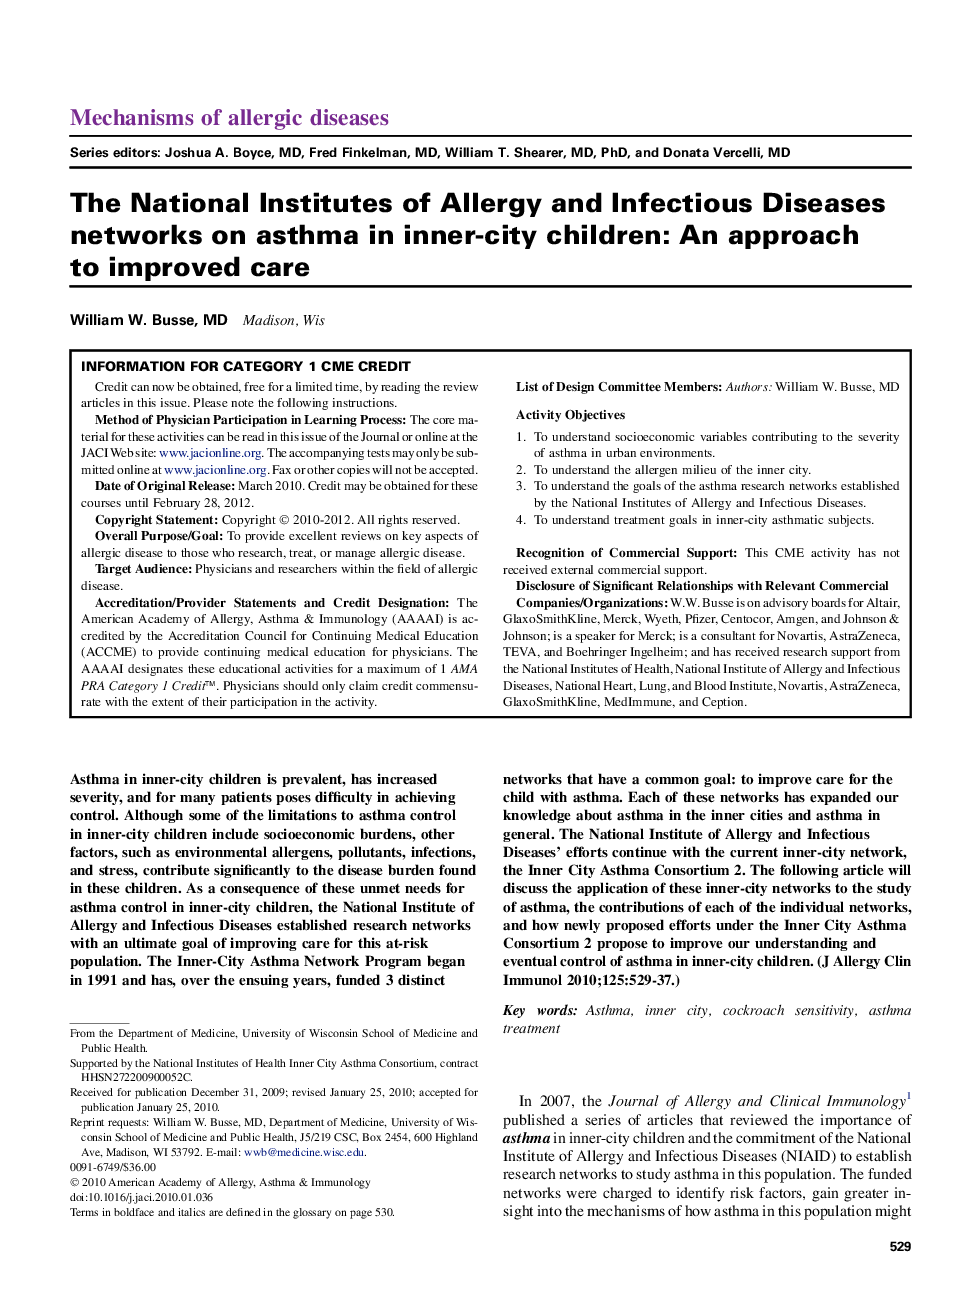 The National Institutes of Allergy and Infectious Diseases networks on asthma in inner-city children: An approach to improved care 